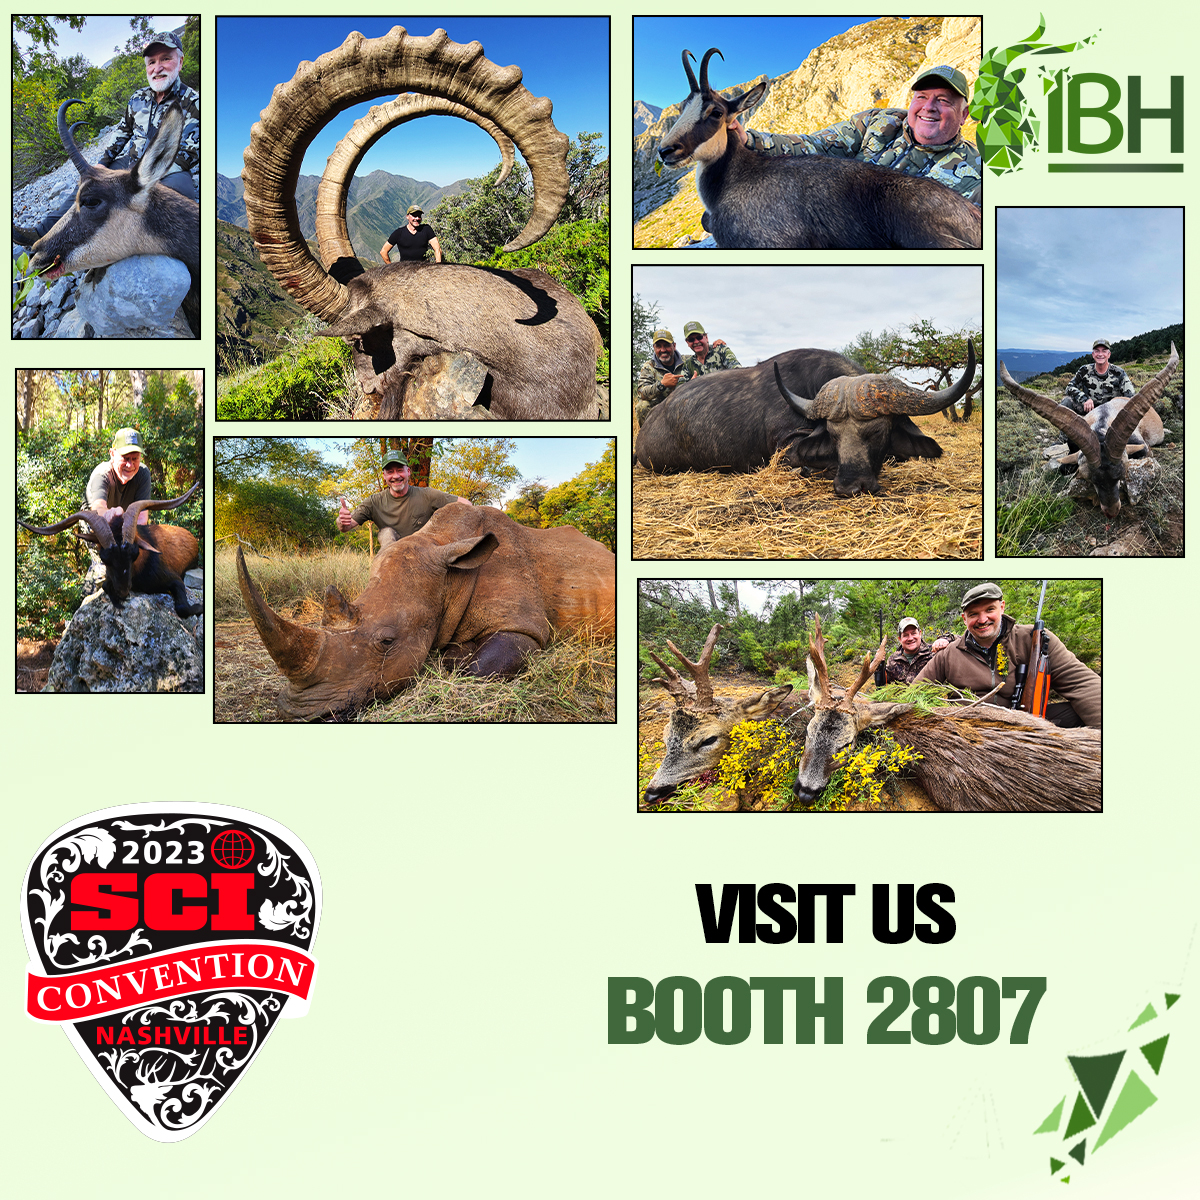 IberHunting ar SCI Convention, booth 2807